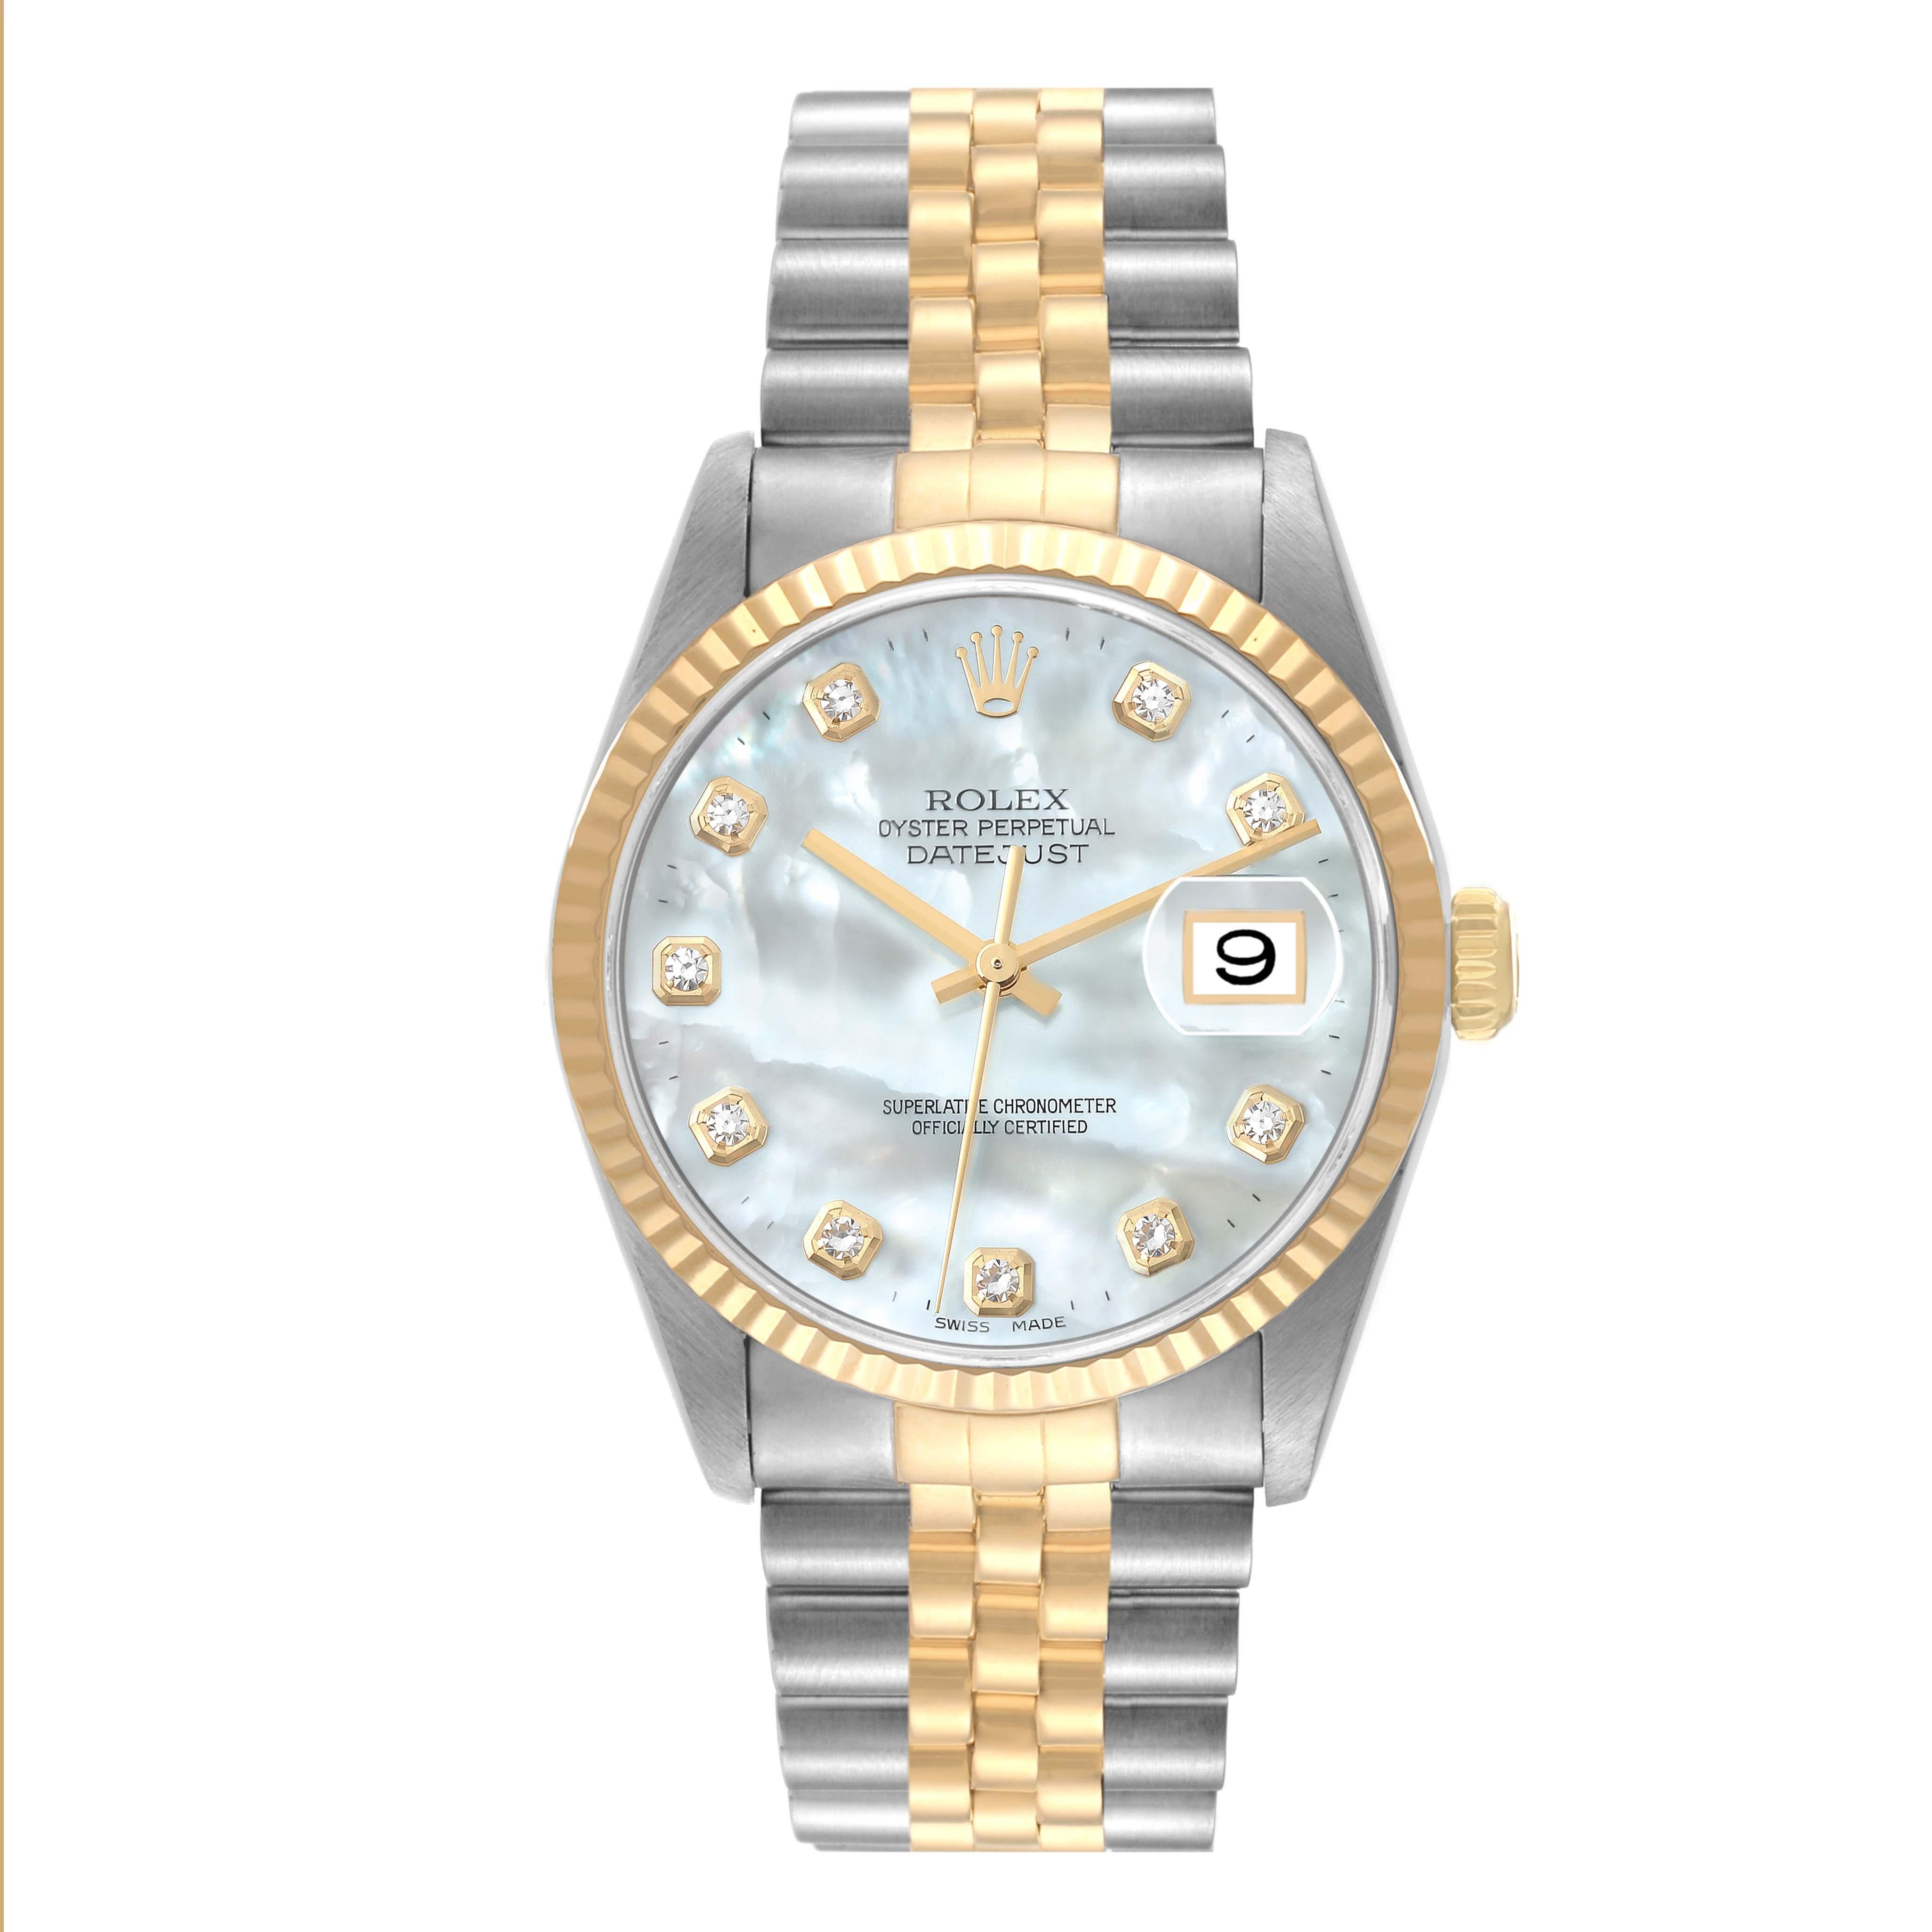 Rolex Datejust Steel Yellow Gold Mother of Pearl Diamond Dial Mens Watch 16233. Officially certified chronometer automatic self-winding movement. Stainless steel case 36 mm in diameter.  Rolex logo on an 18K yellow gold crown. 18k yellow gold fluted